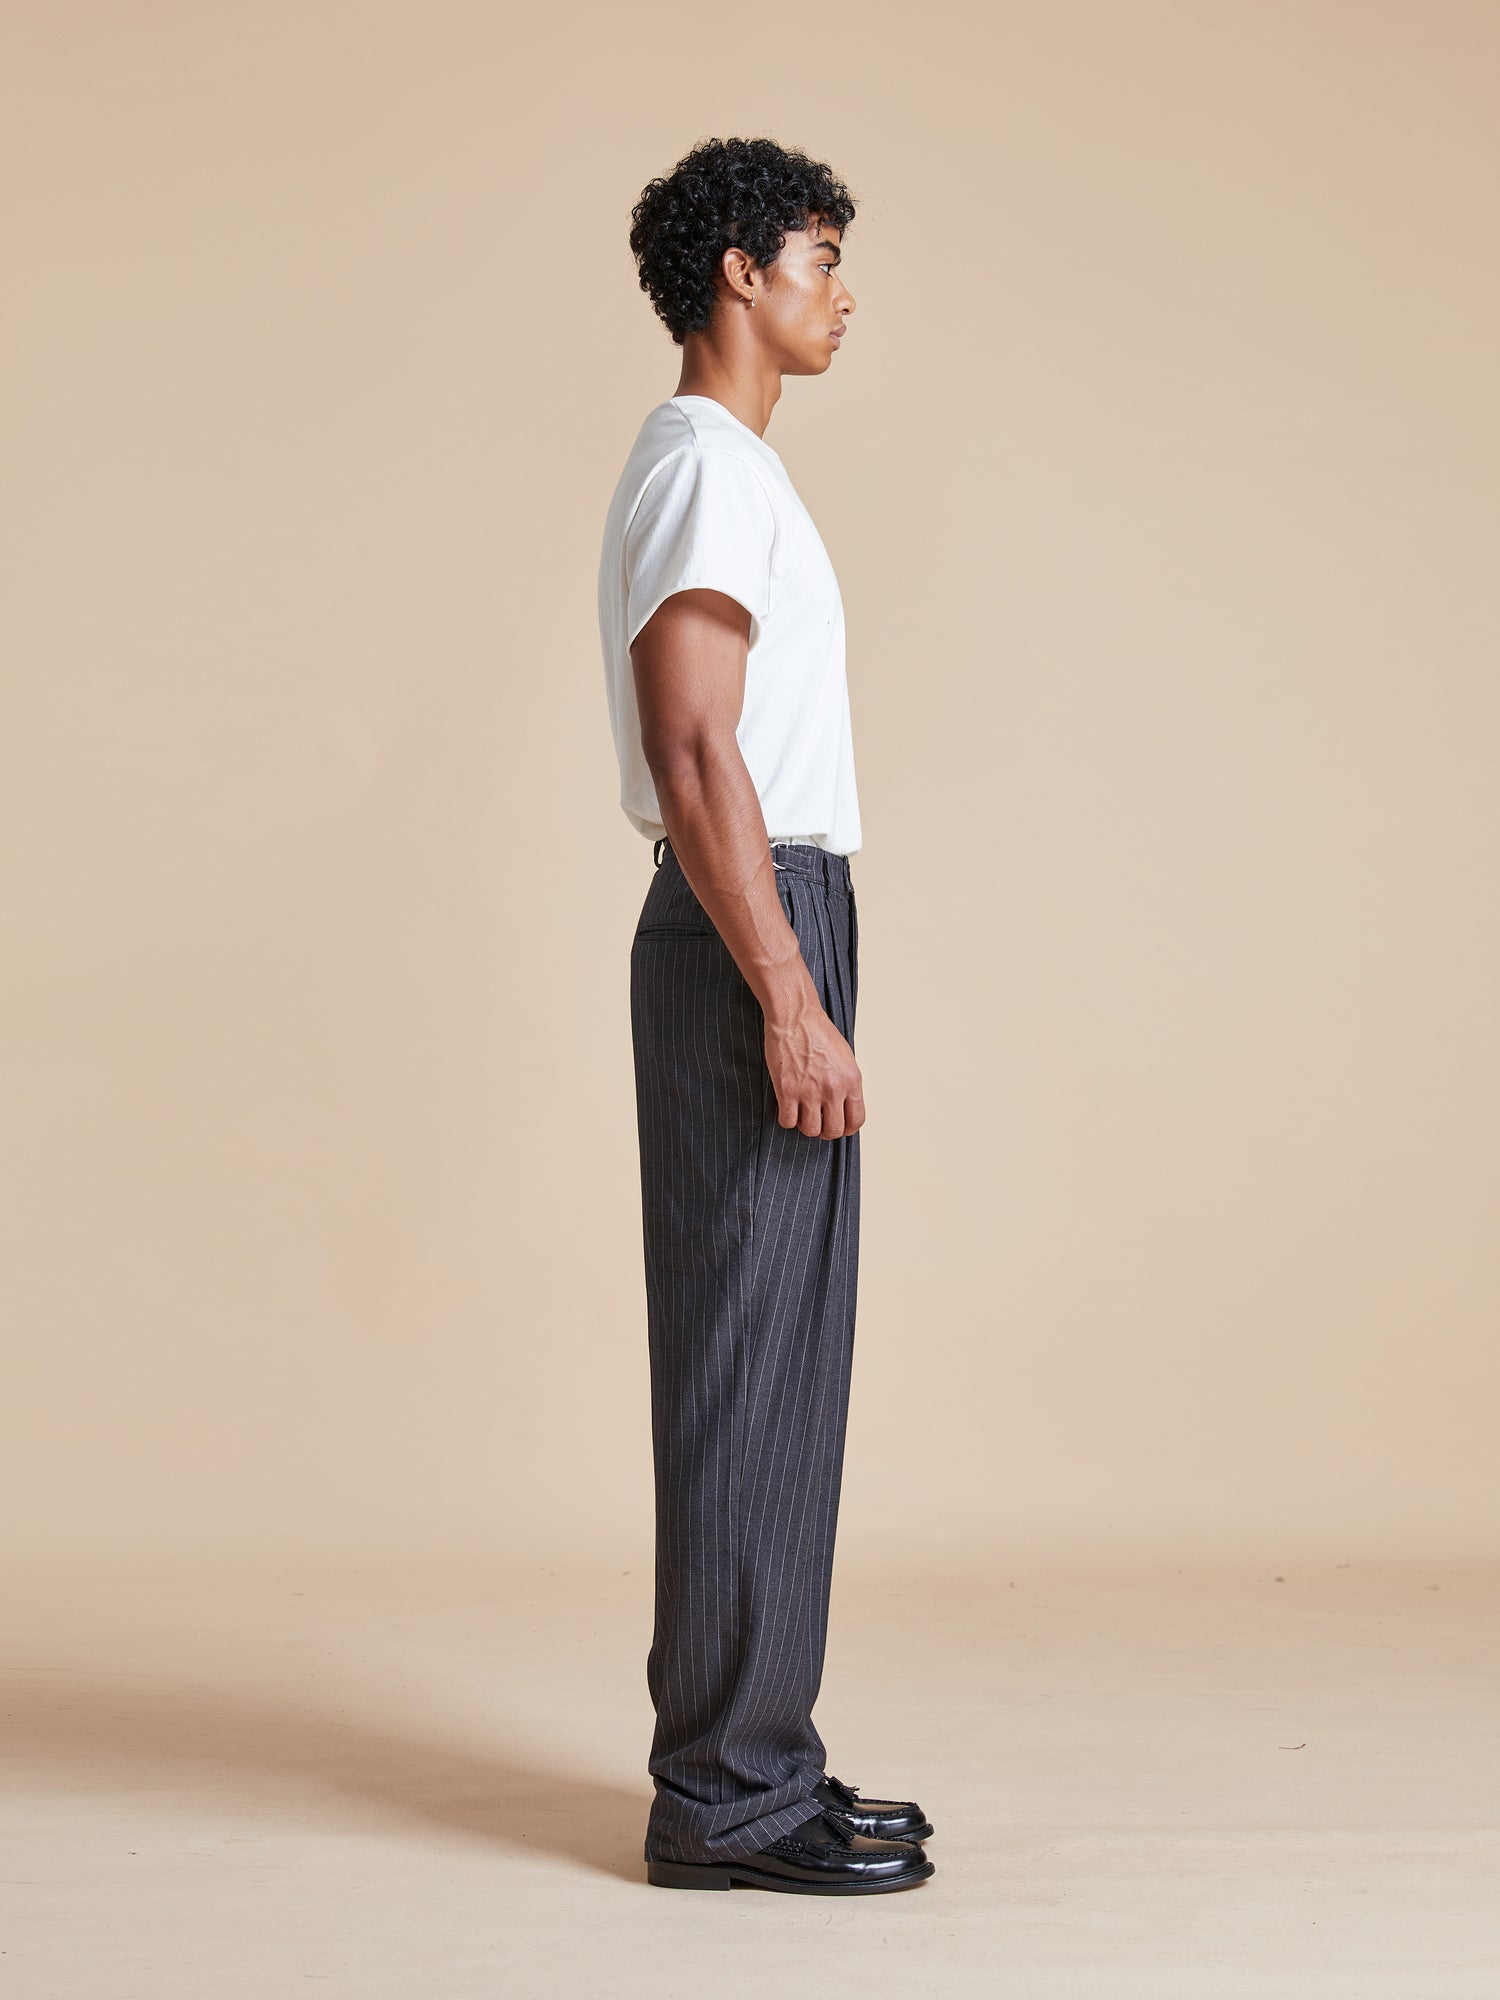 A man wearing a white t-shirt and black Found Pinstripe Pleated Trousers.